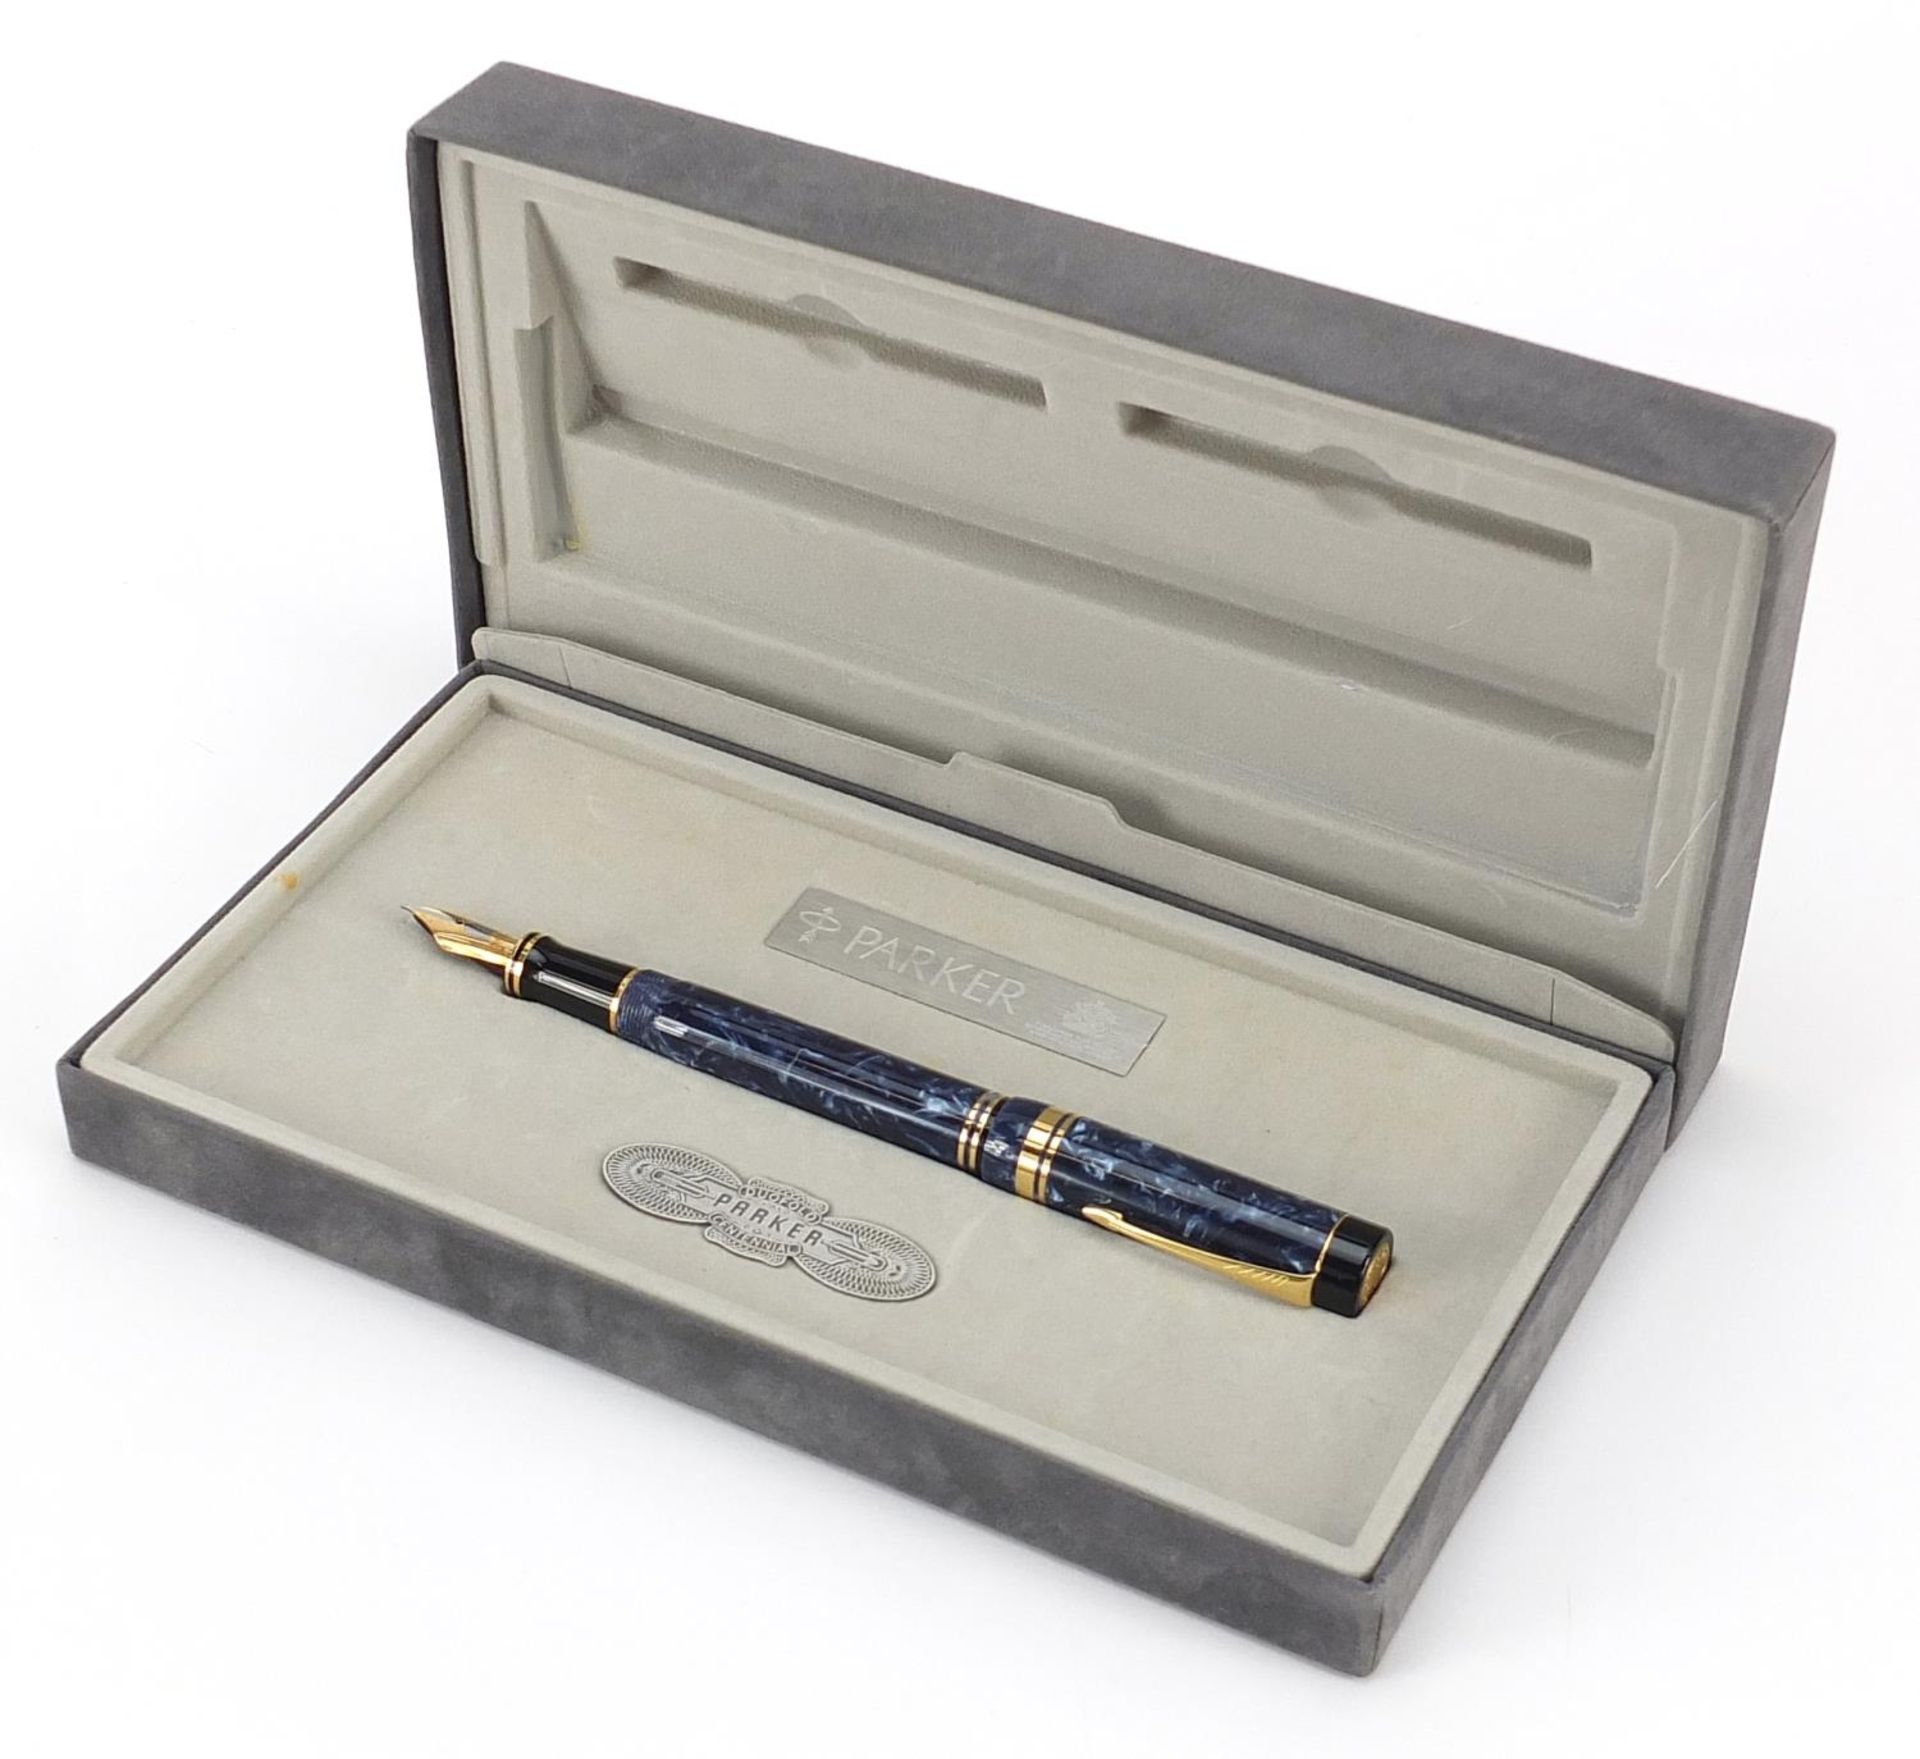 Parker Centennial blue marbleised fountain pen with 18k gold nib and box